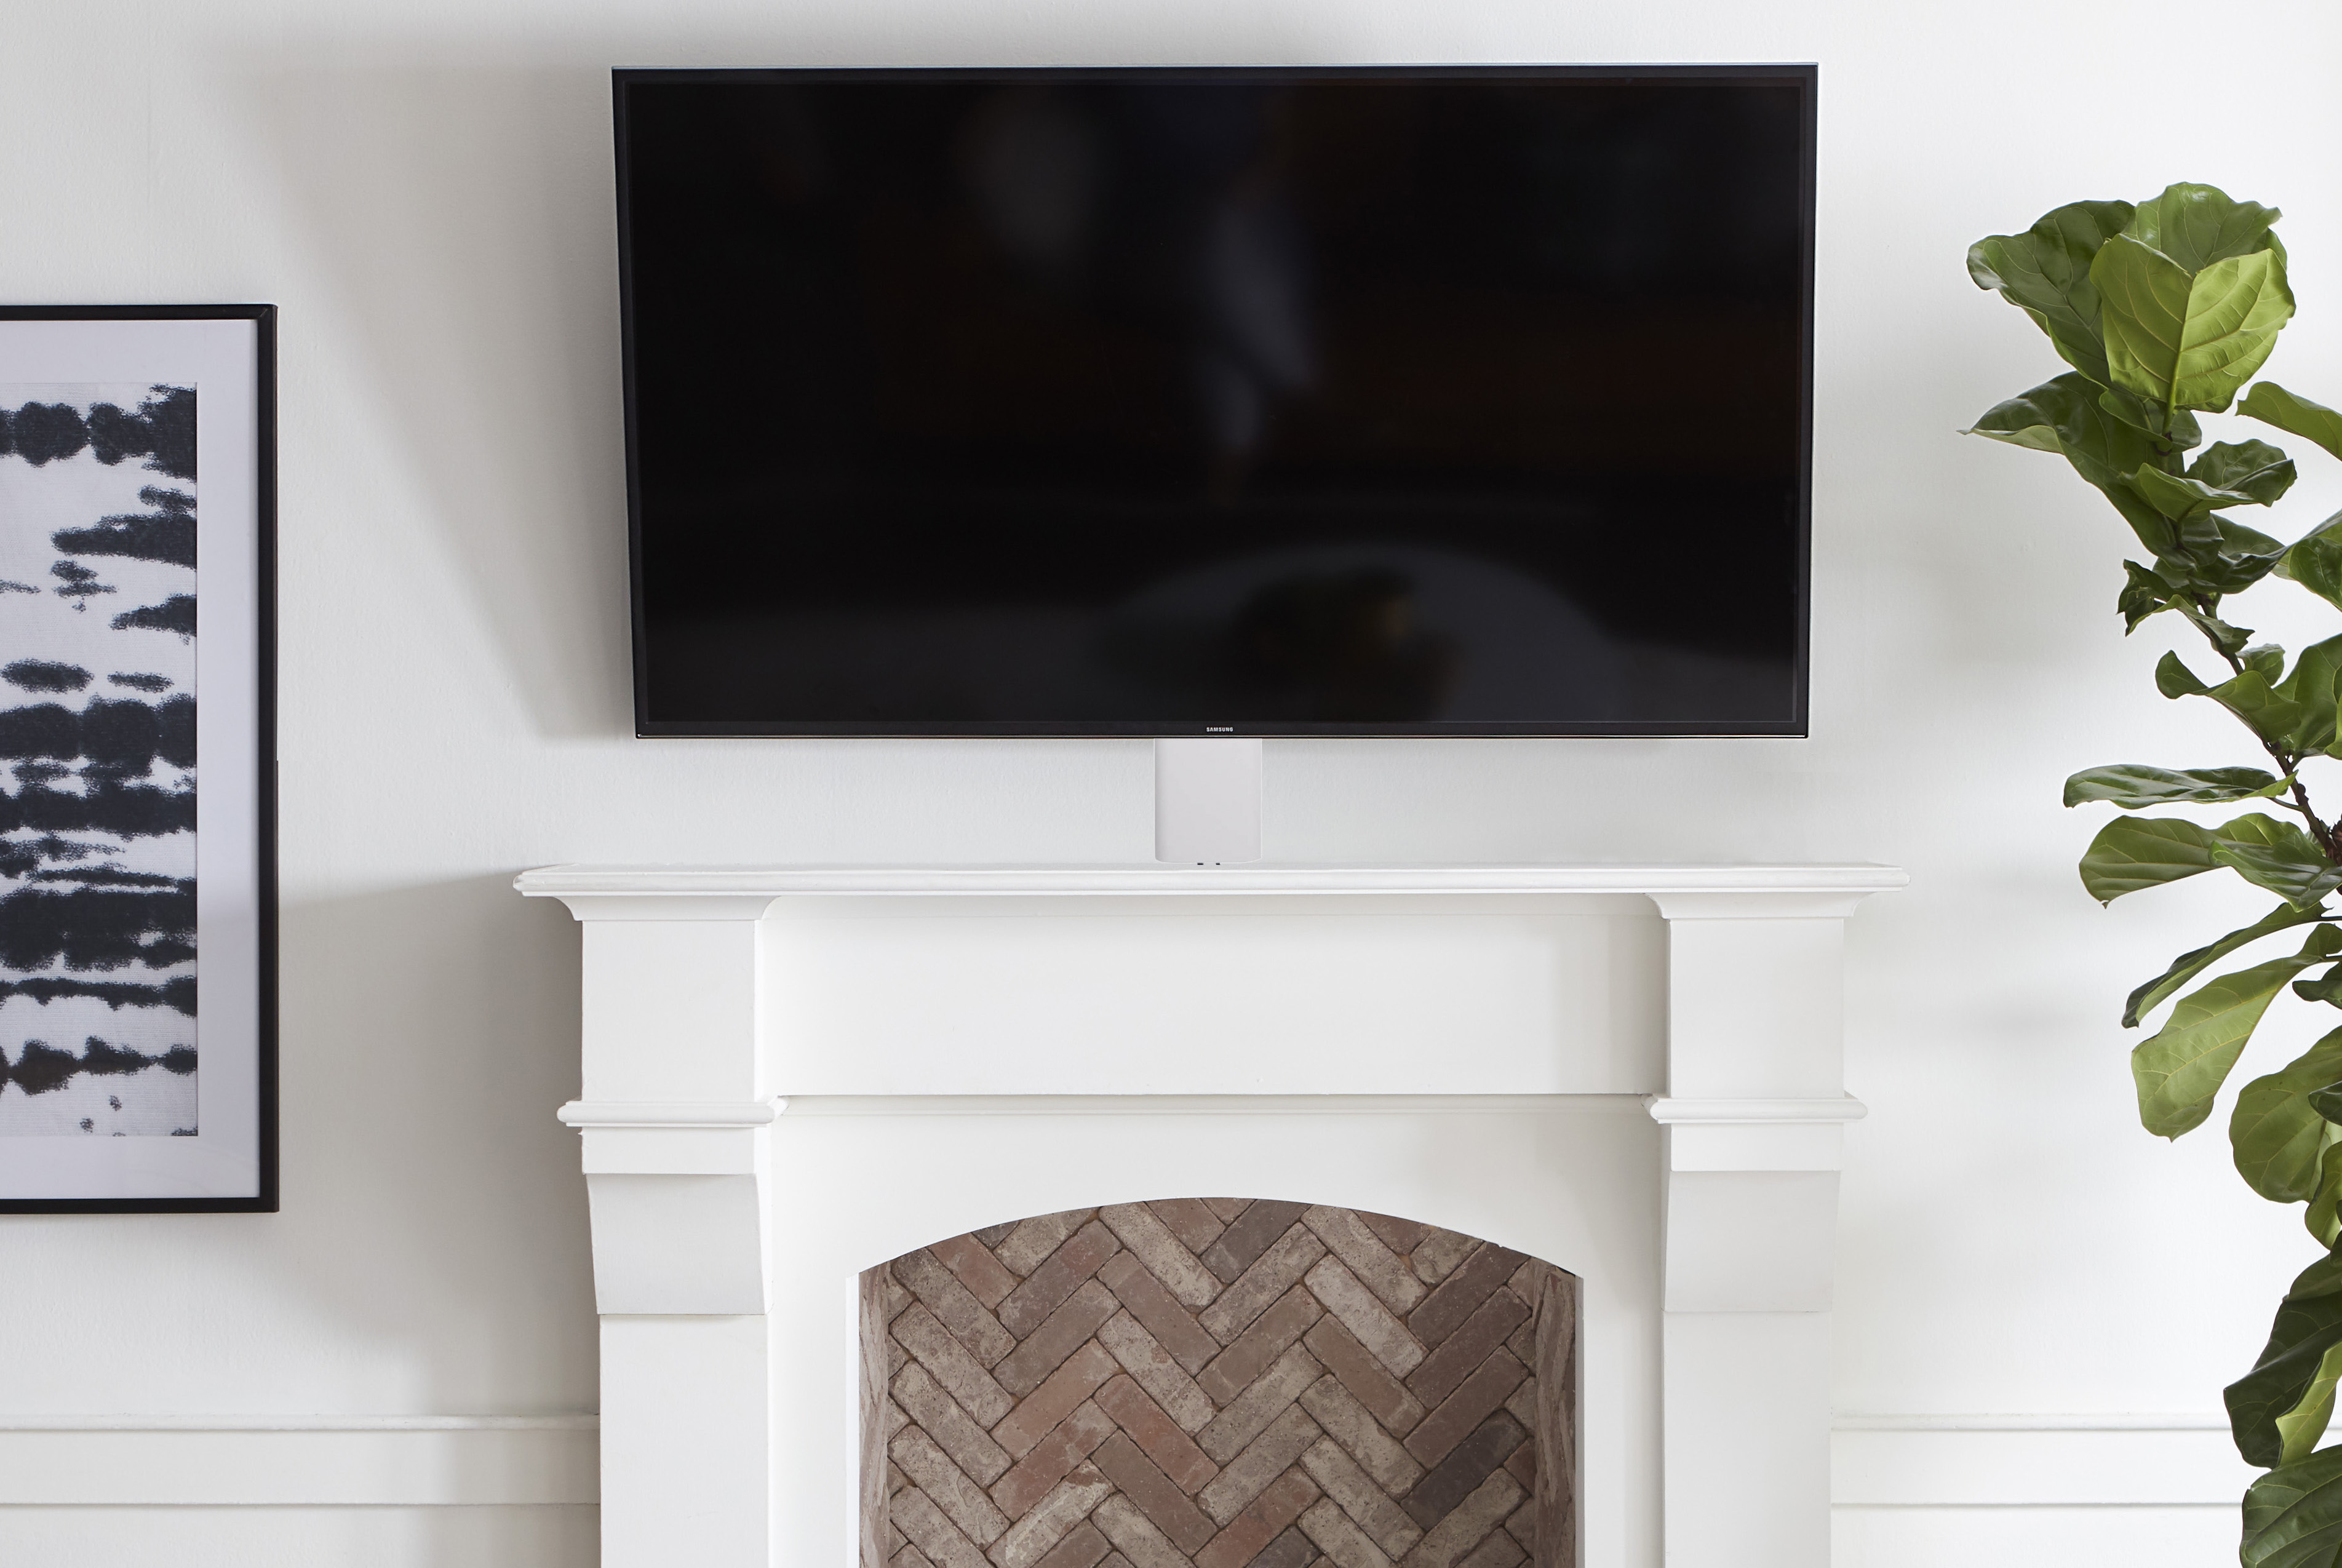 Mounting A Tv Over Fireplace How, How To Hang A Tv Above Fireplace Without Studs